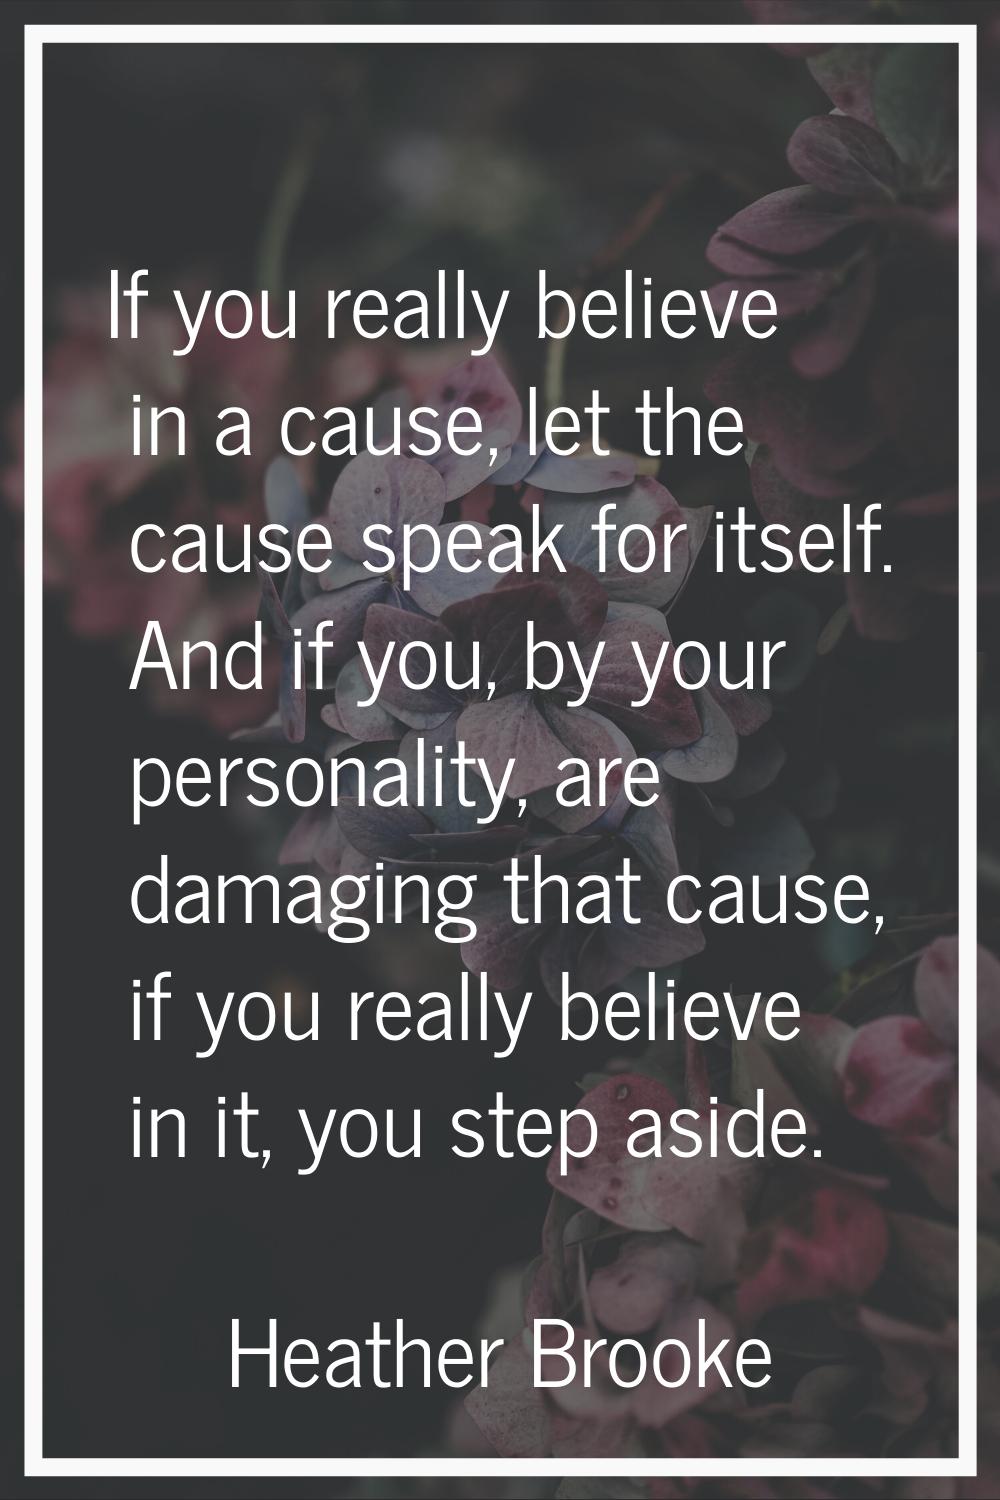 If you really believe in a cause, let the cause speak for itself. And if you, by your personality, 